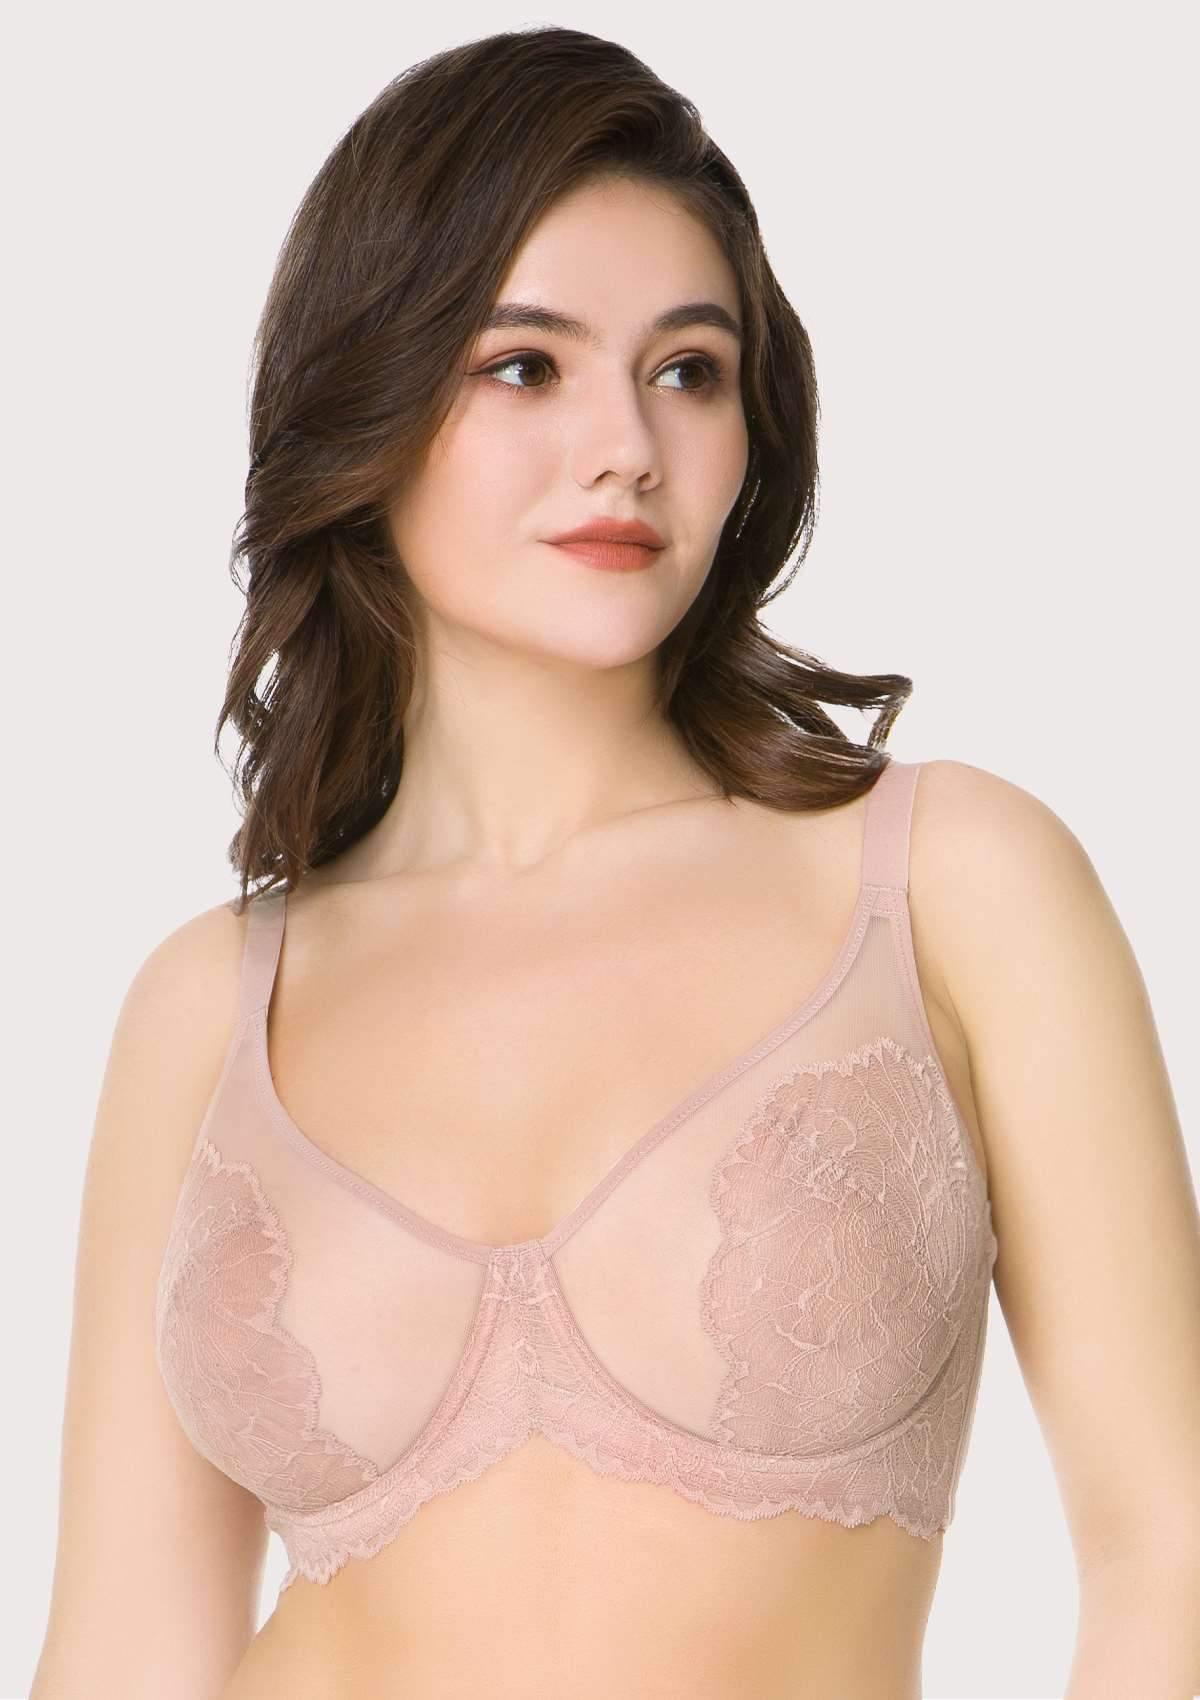 HSIA Blossom Lace Bra And Panties Set: Best Bra For Large Busts - Dark Pink / 44 / D